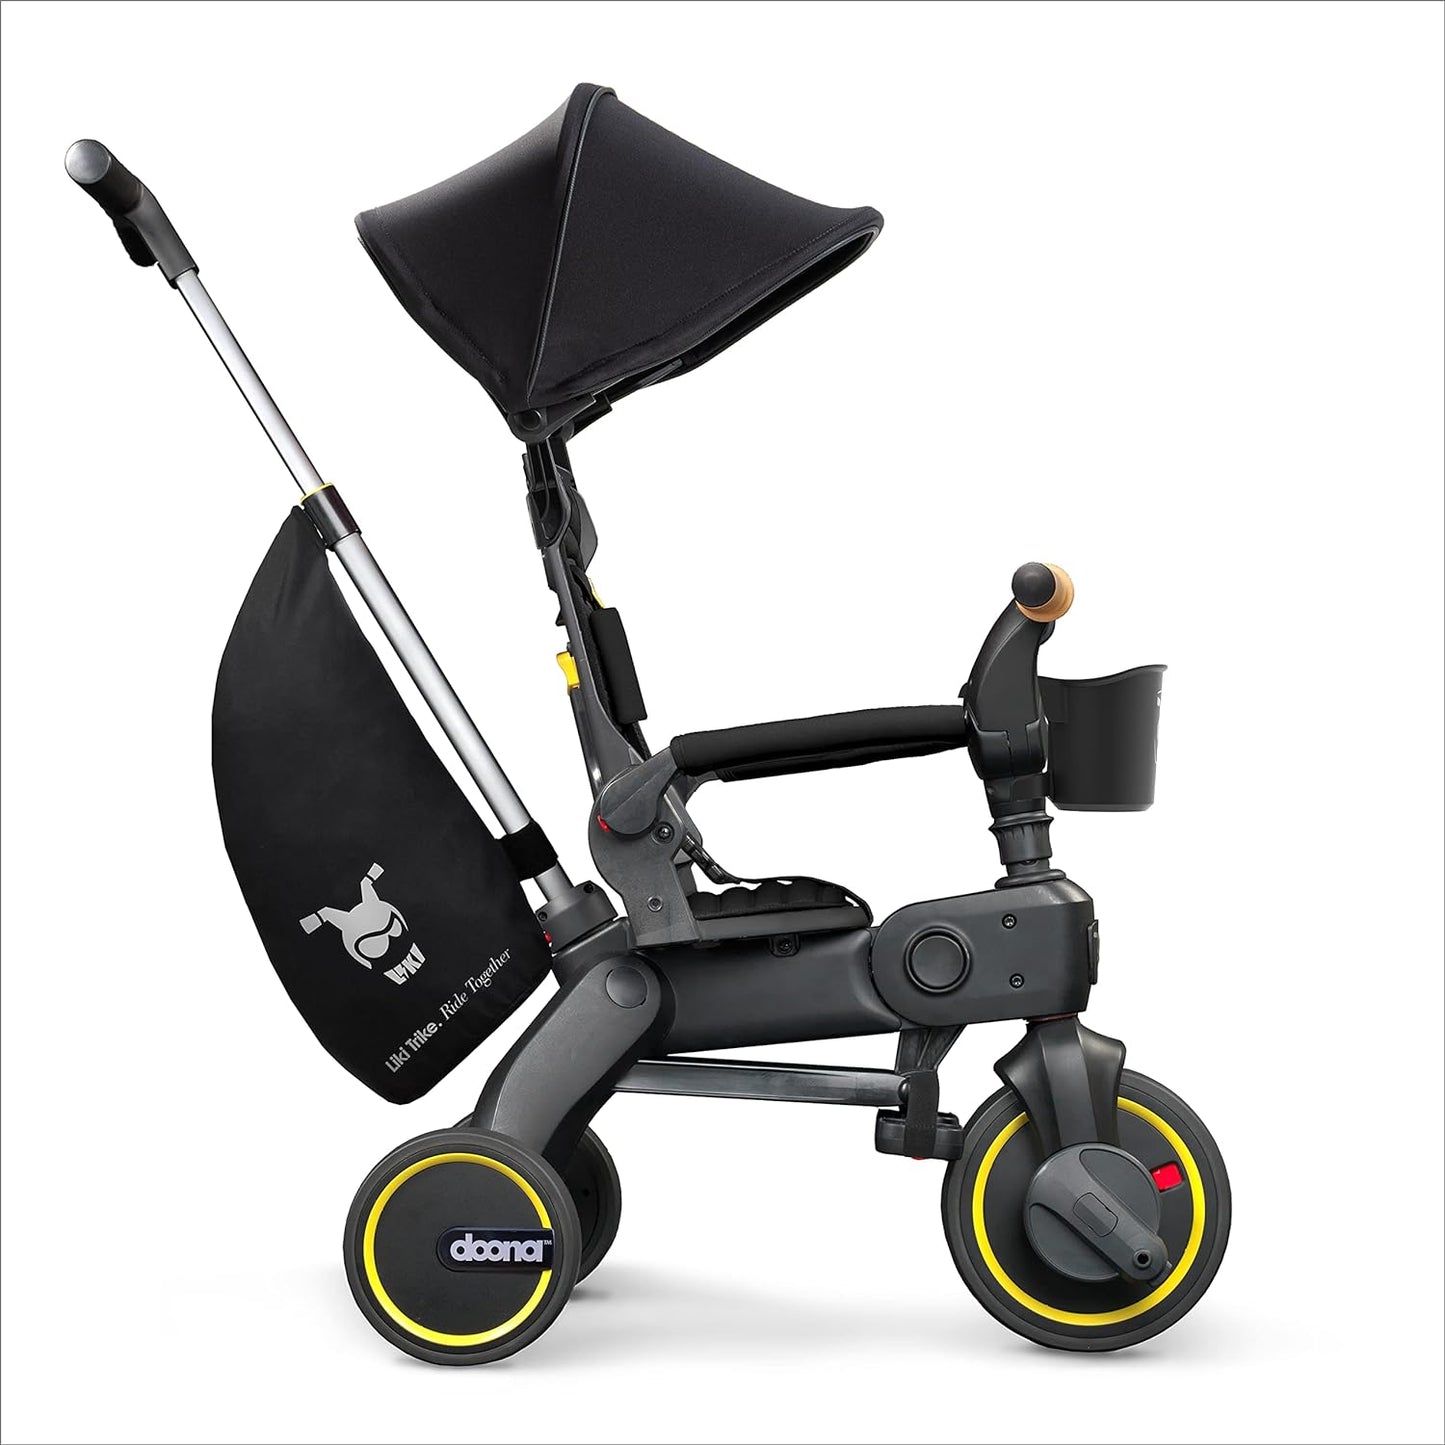 Doona Liki Trike S3 - Premium Foldable for Toddlers, Toddler Tricycle Stroller, Push and Fold Ages 10 Months to 3 Years, Grey Hound